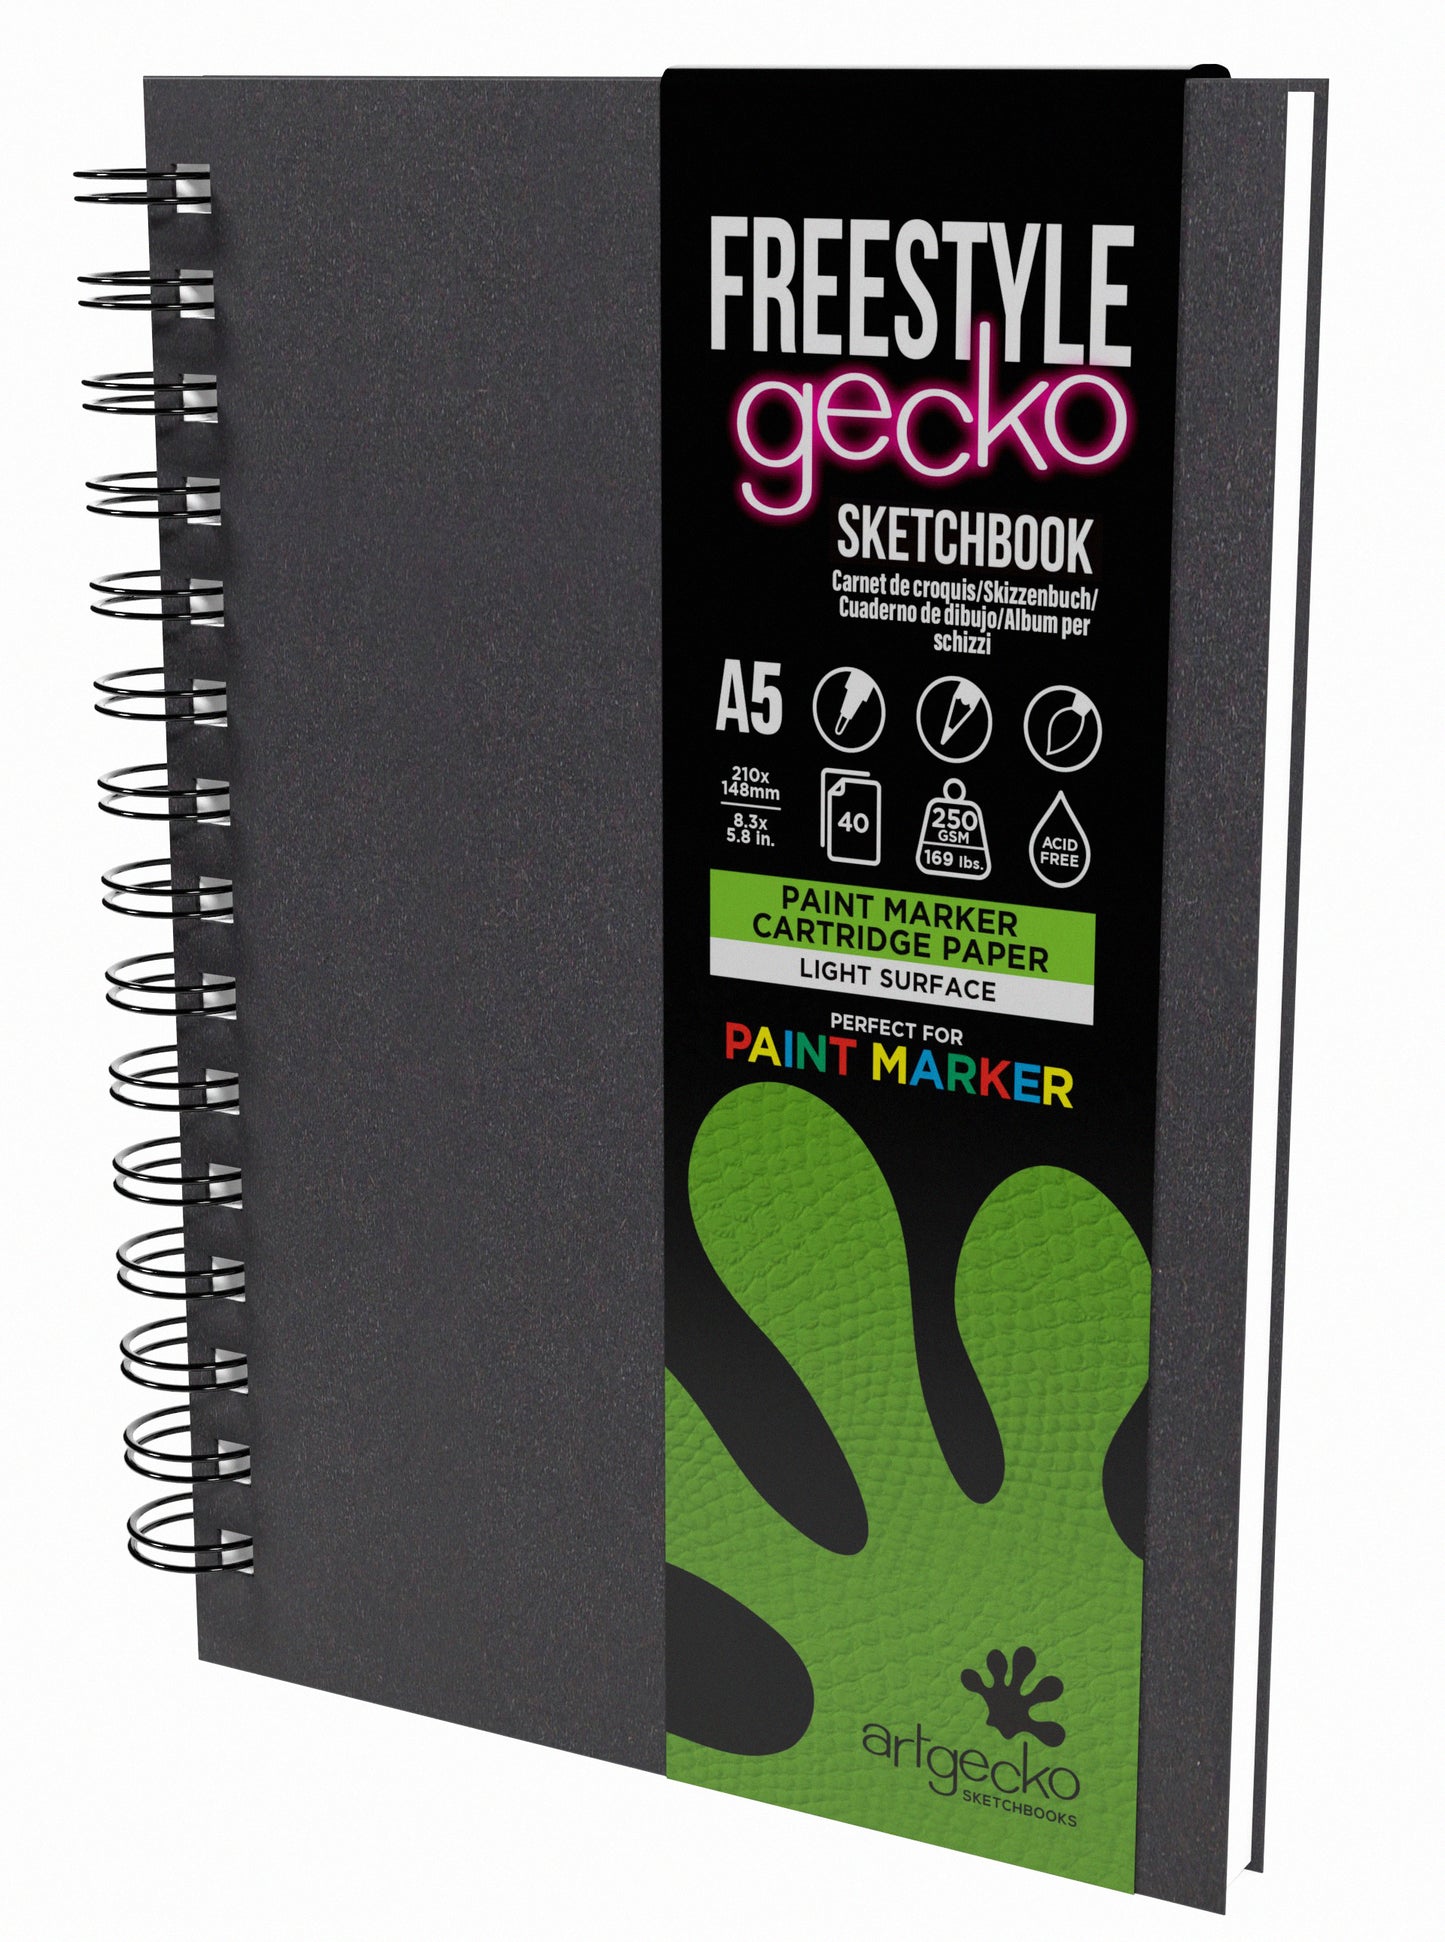 
                  
                    A5 portrait Artgecko Freestyle sketchbook with light surface hybrid paper, perfect for paint markers. 
                  
                